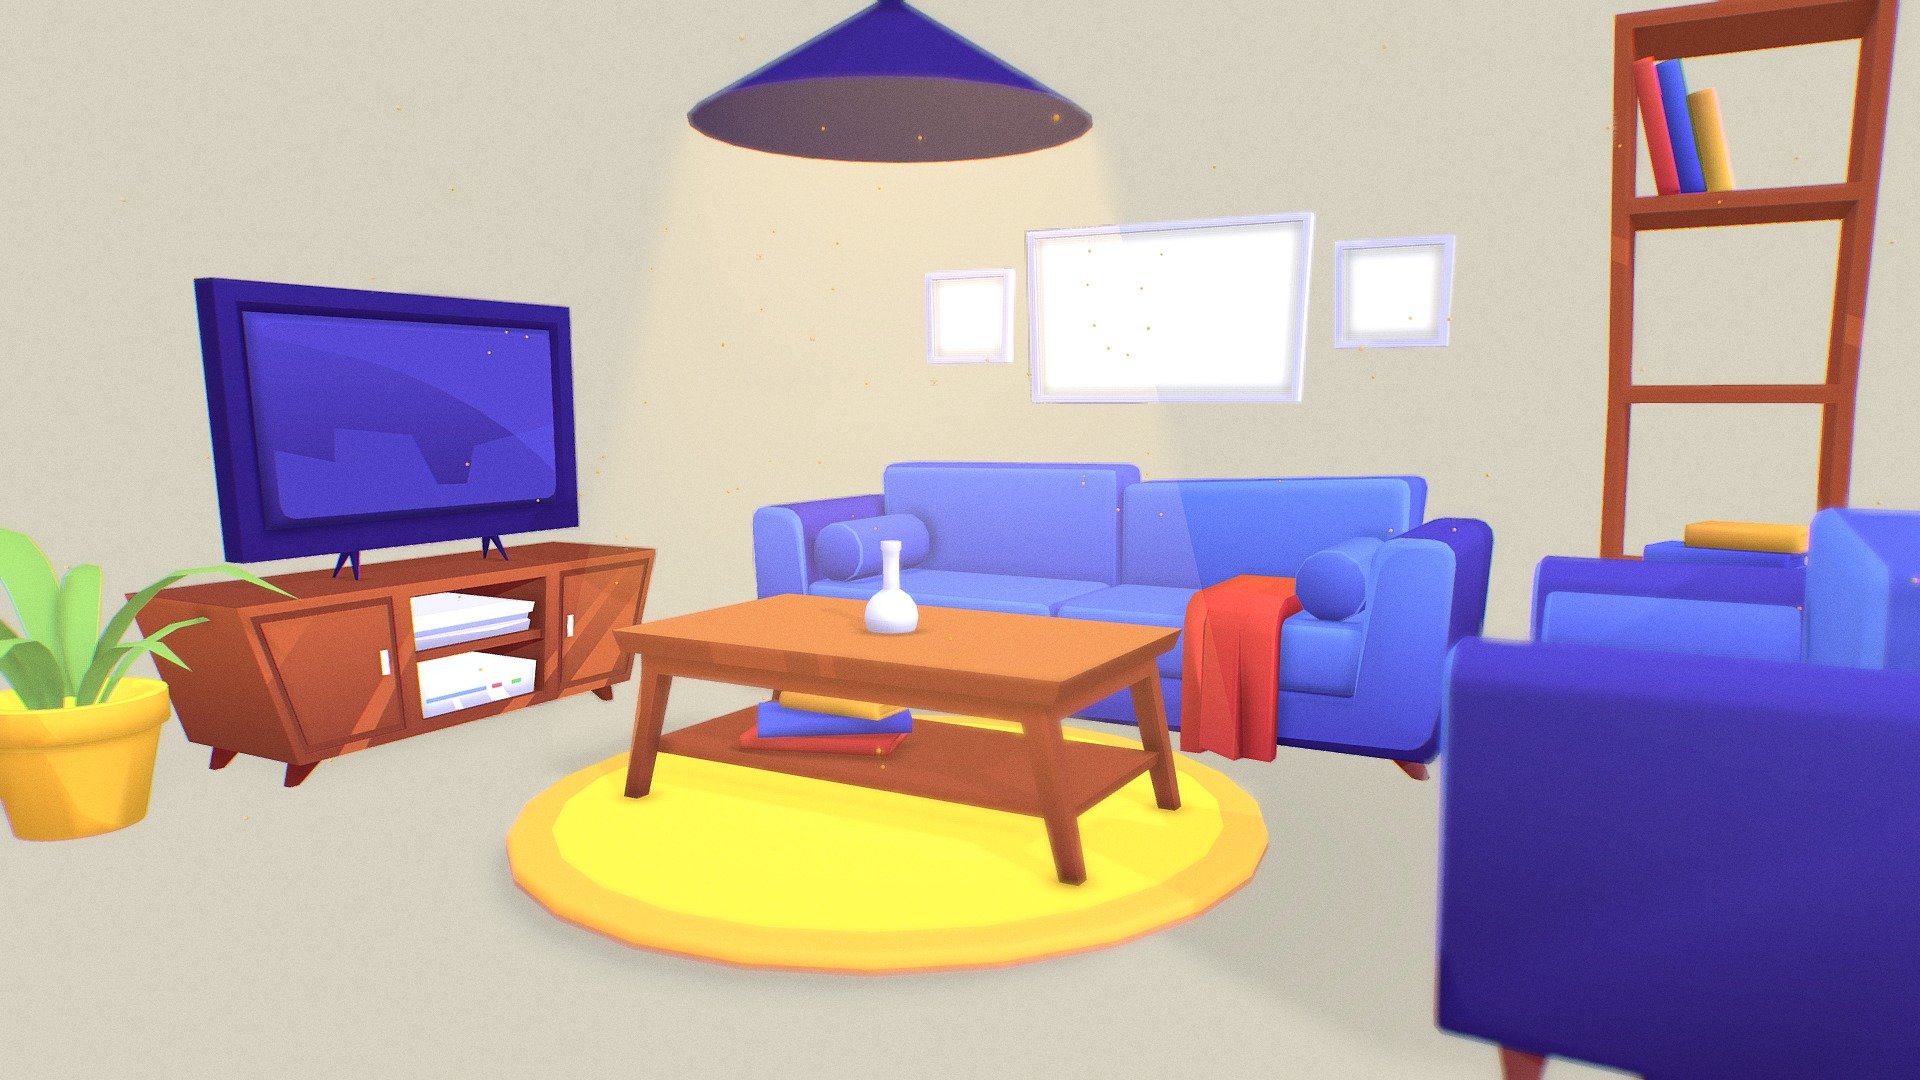 These props made on blender, FBX file included. Ready for UNITY or UNREAL games.

Reference from: https://www.freepik.com/free-vector/living-room-interior-with-furniture-tv_38591344.htm#page=2&amp;query=livingroom&amp;position=0&amp;from_view=author

If you want to get more asset like that follow 3d model